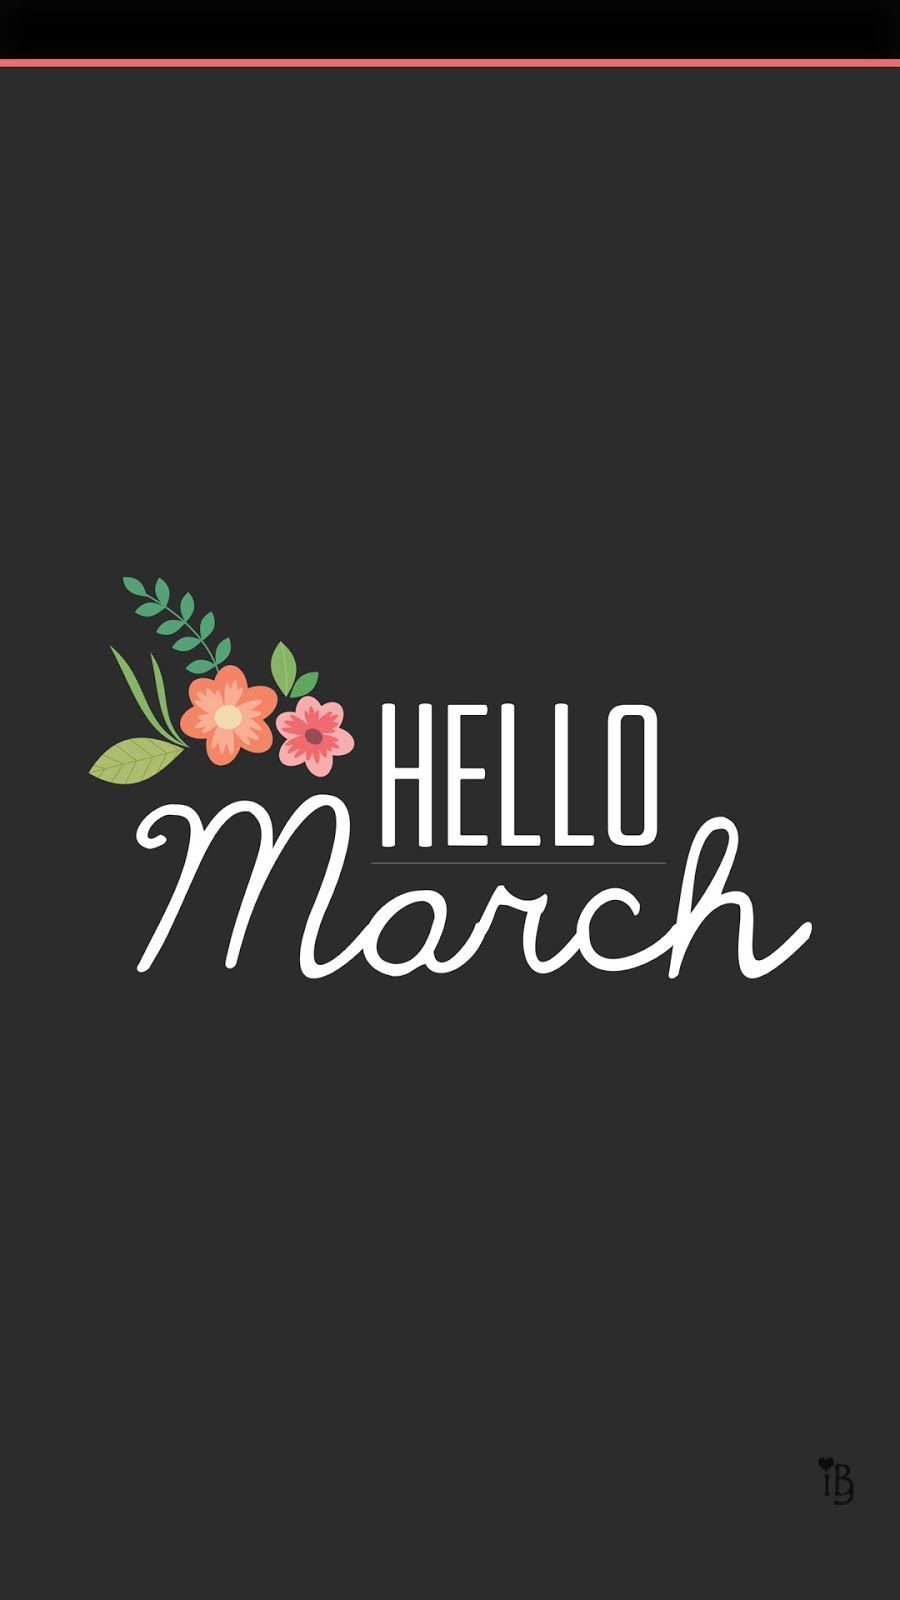 Hello March wallpaper for your phone. Download it for free on the blog! - March